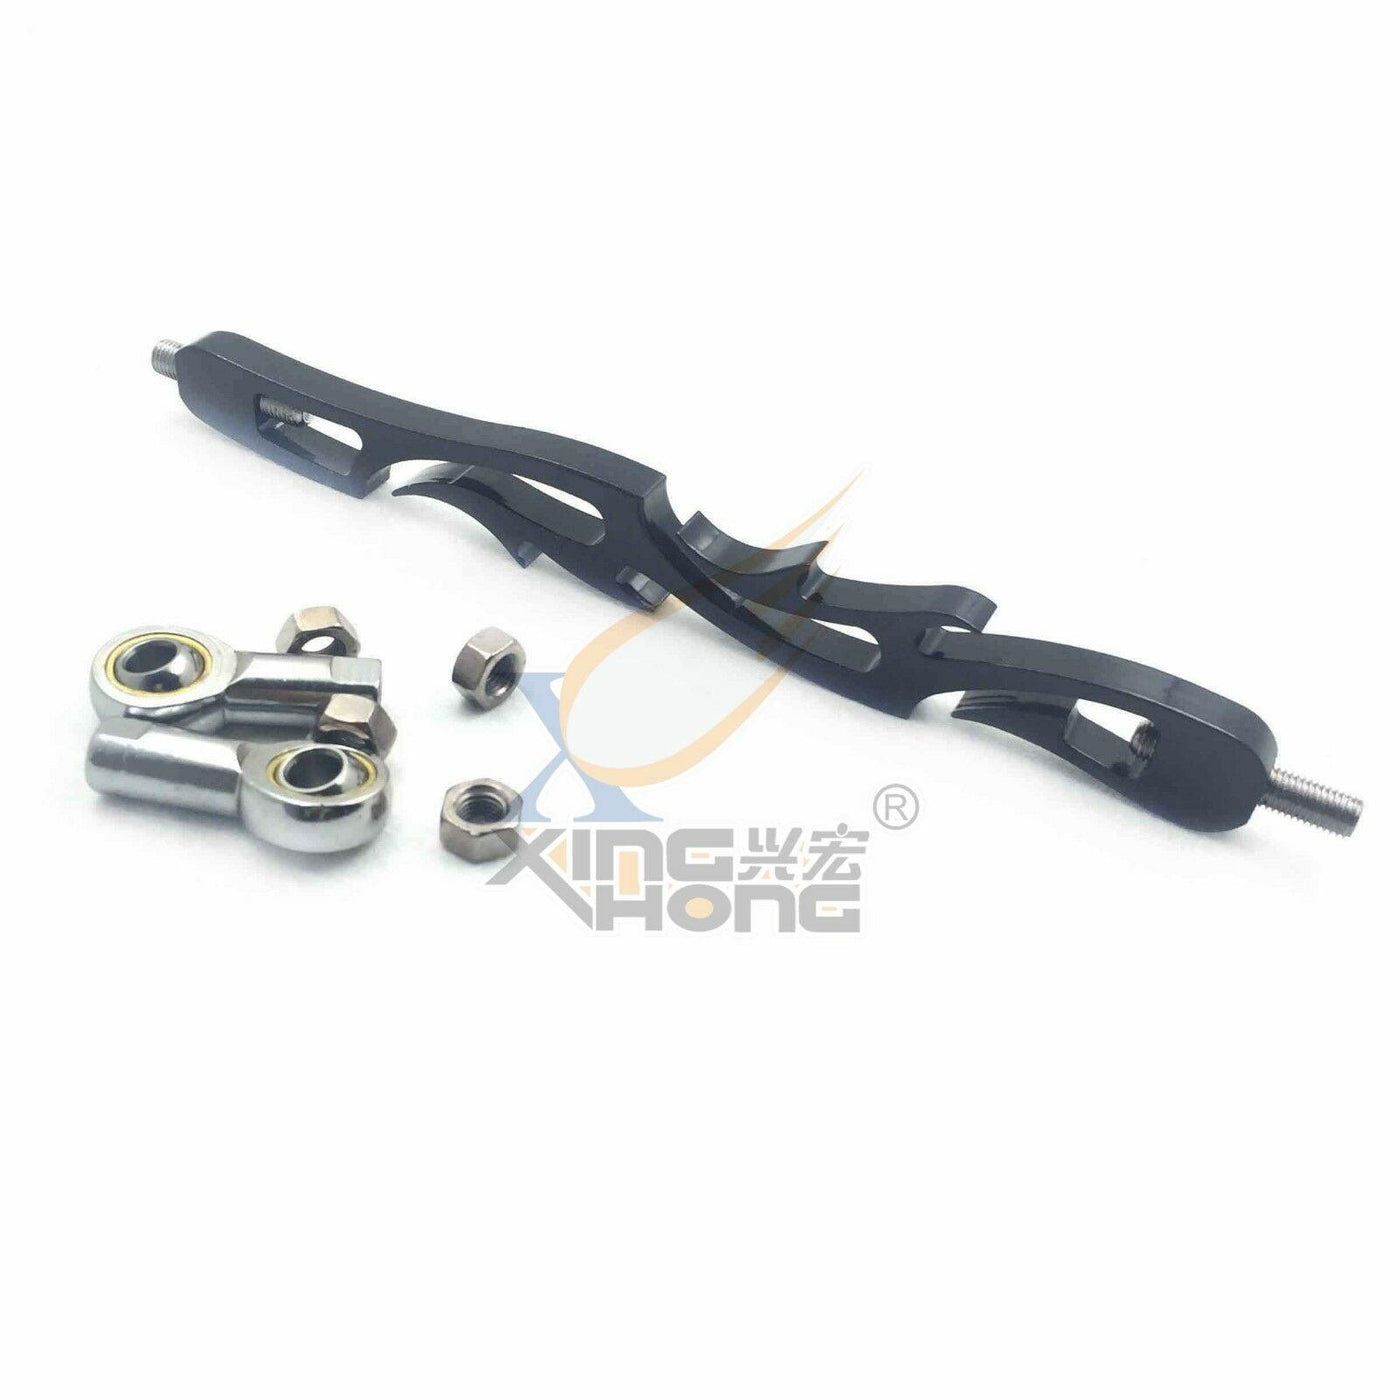 For 1980-up Harley Softail Fxdwg Dyna Glide Flhr Flht Black Flame Shift Linkage - Moto Life Products